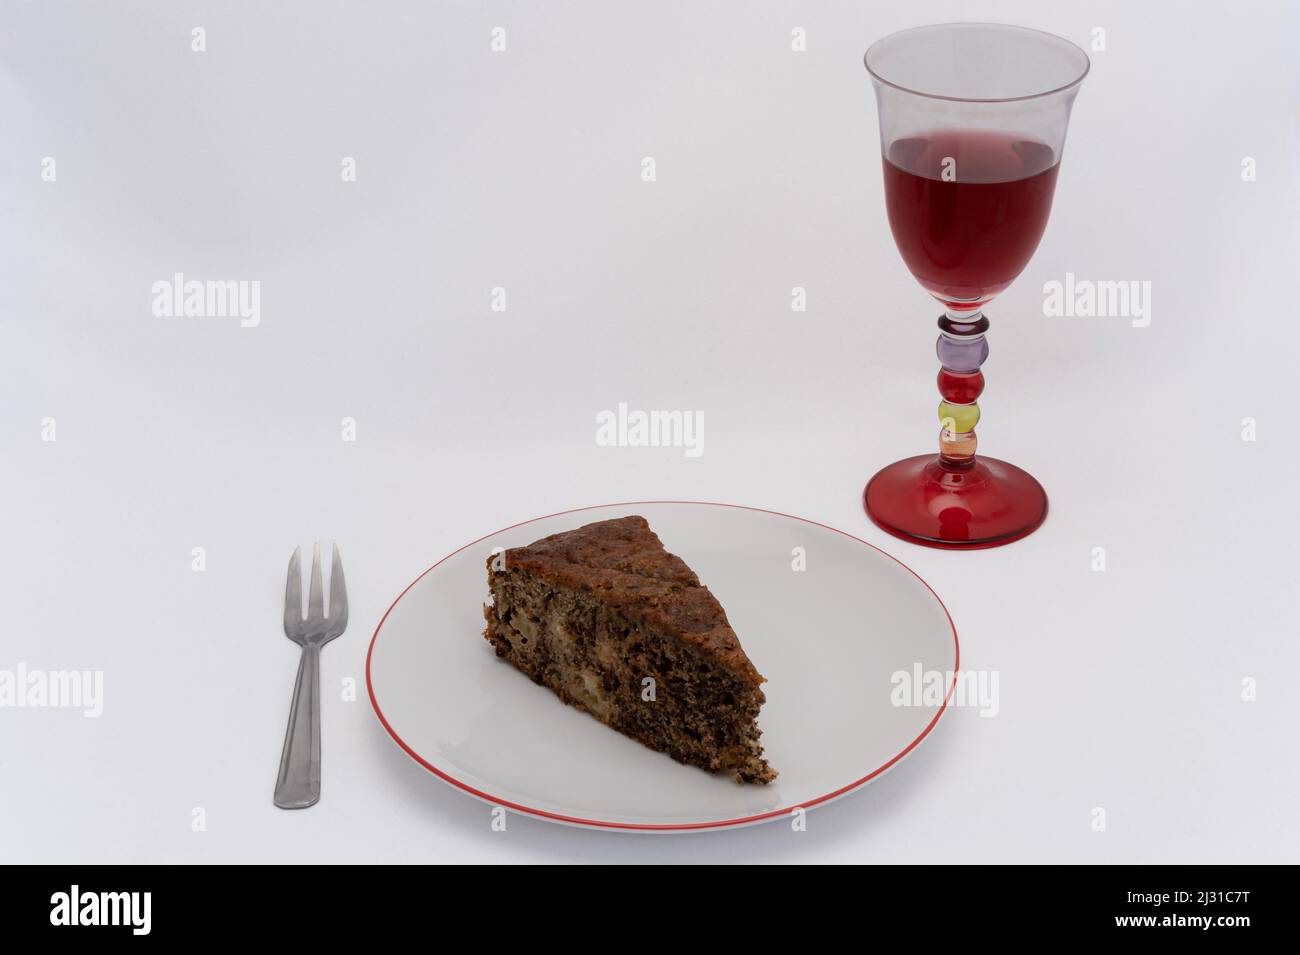 Homemade dessert. Yogurt cake with apples and chocolate in a plate, with a fork and a glass of wine Stock Photo